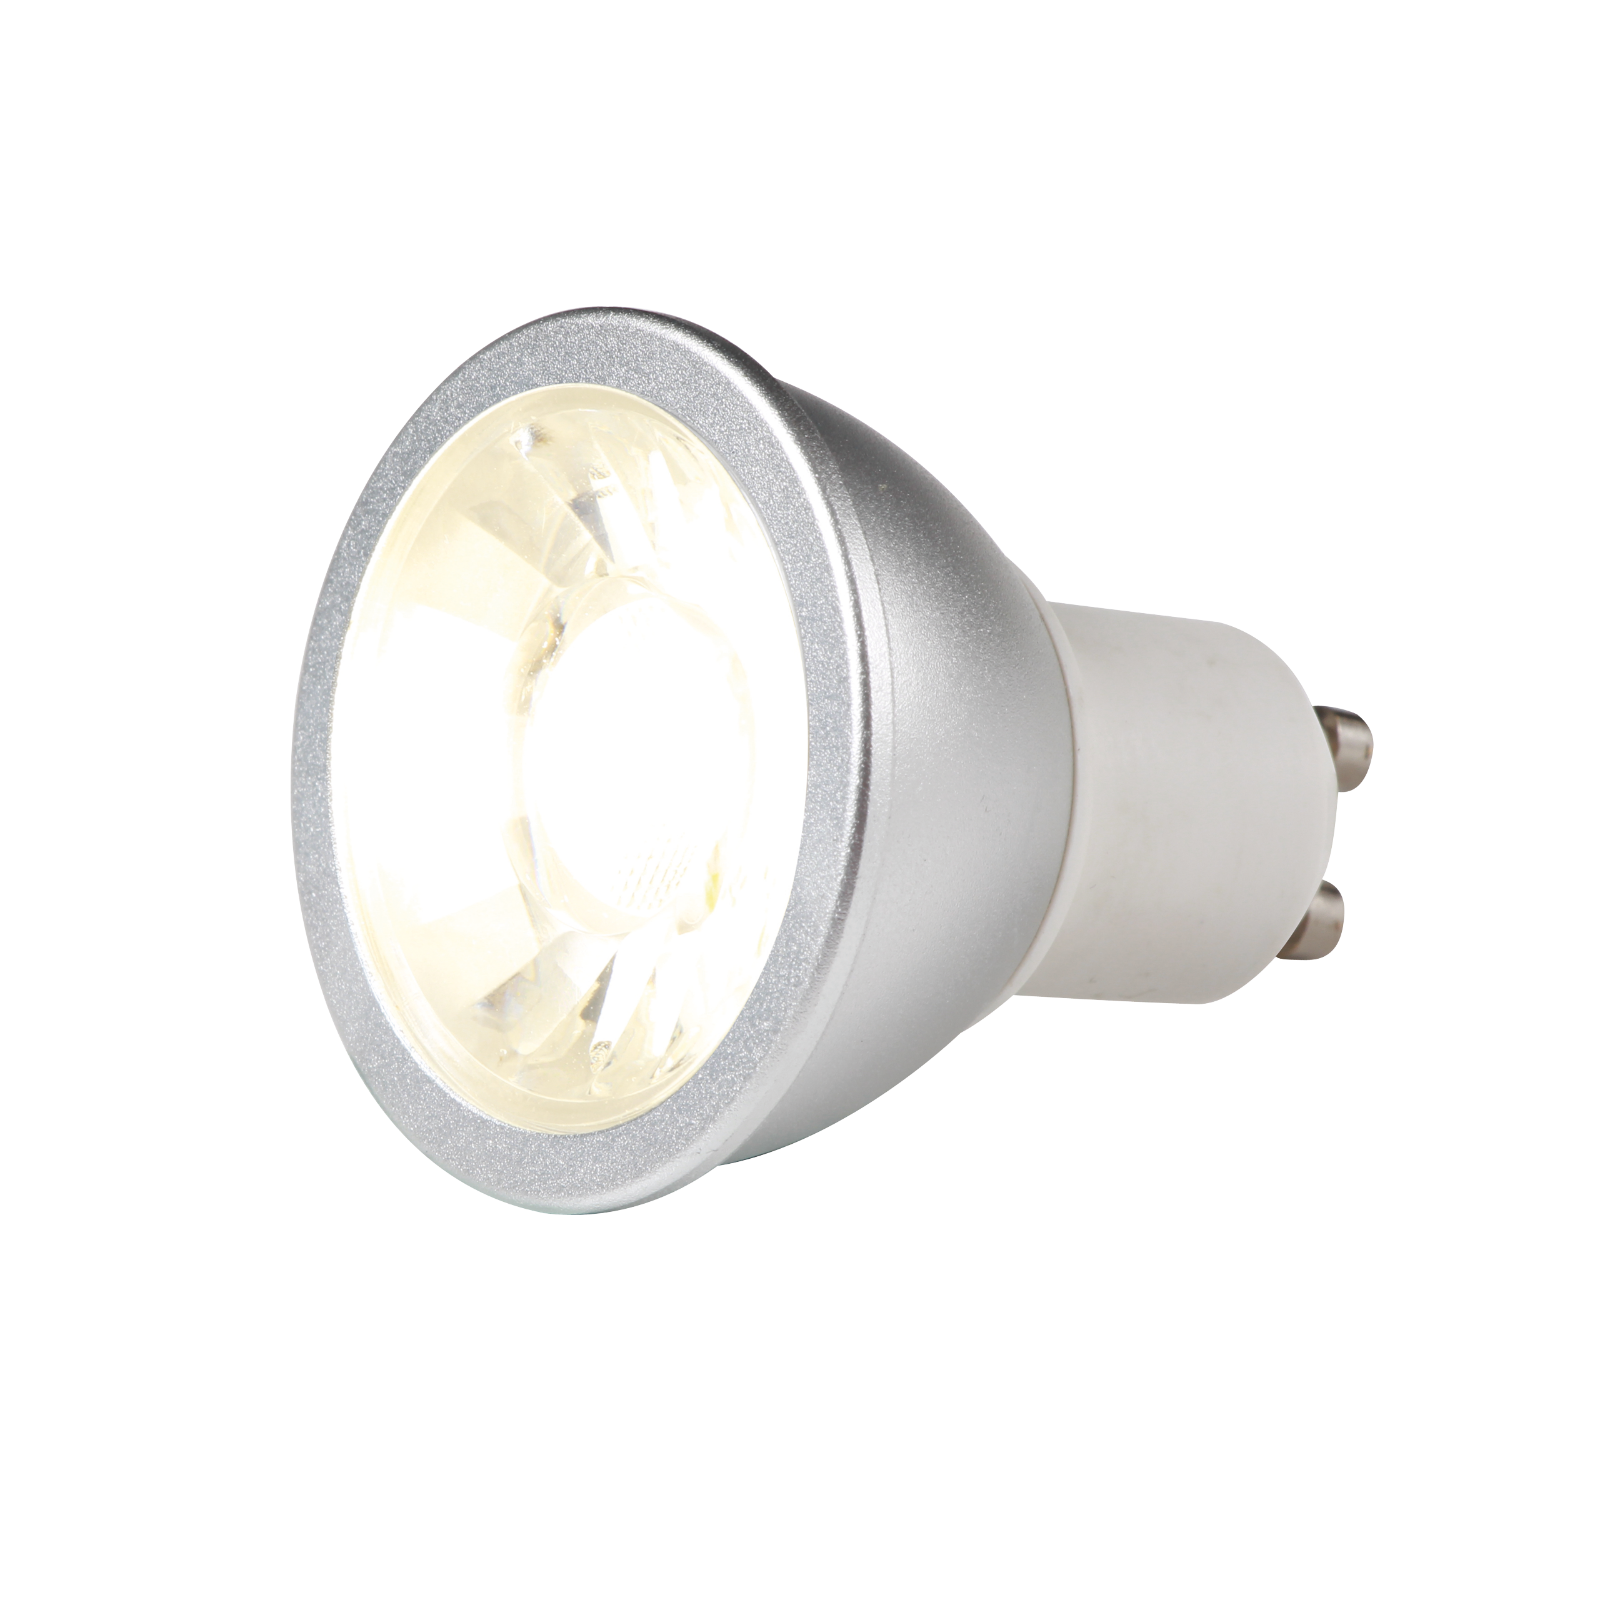 230V GU10 LED 7W Cool White 4000K (dimmable) - GUCOB7CW 